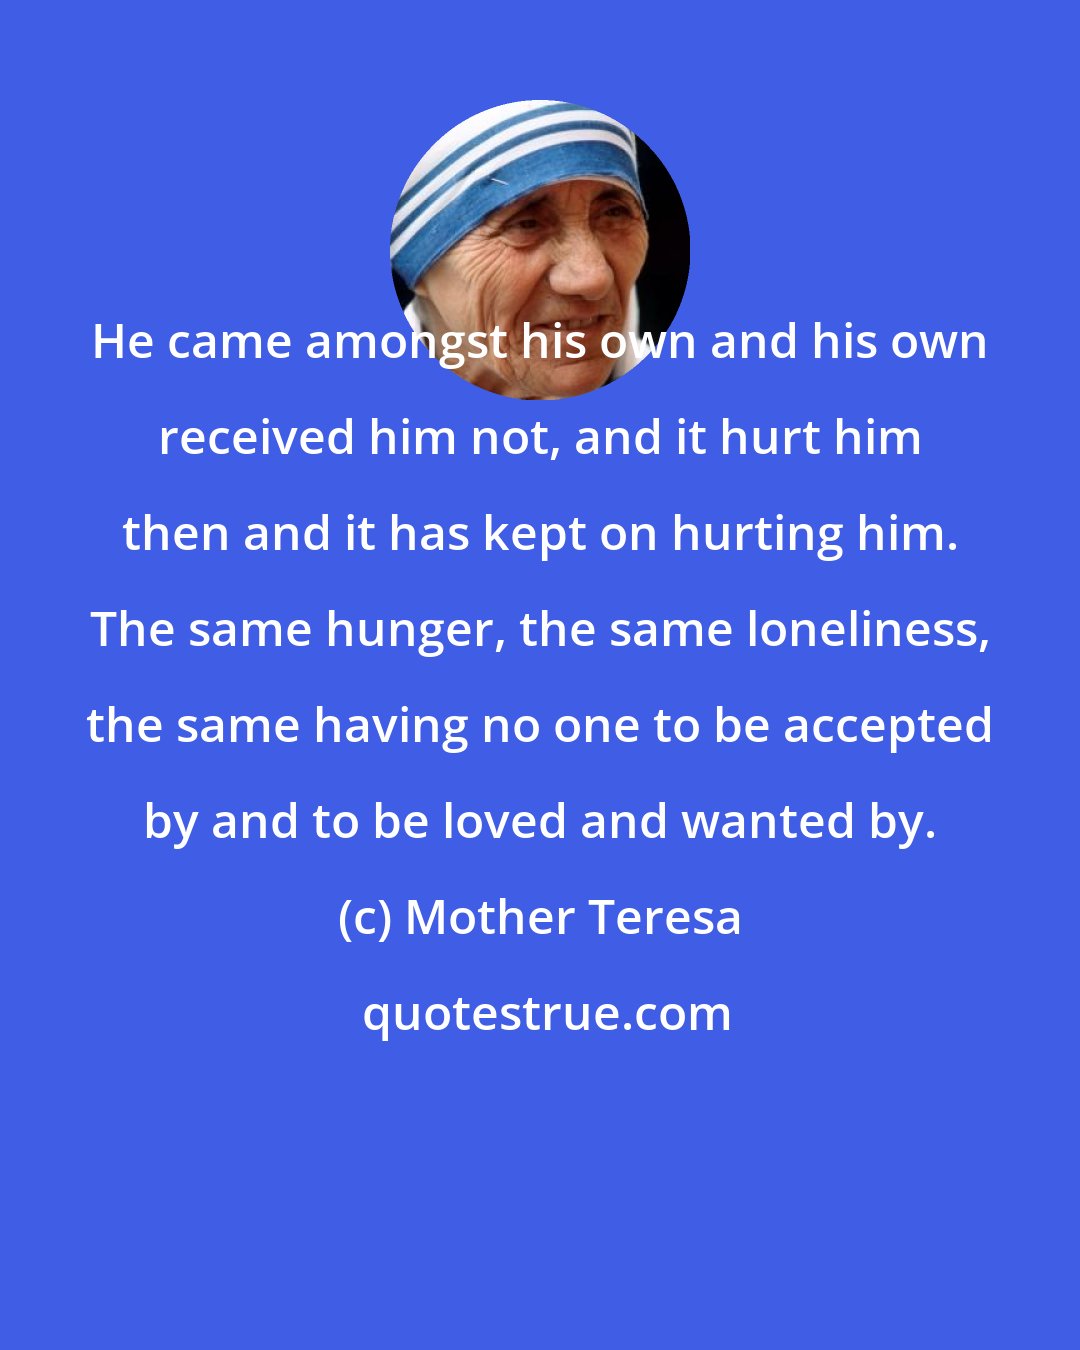 Mother Teresa: He came amongst his own and his own received him not, and it hurt him then and it has kept on hurting him. The same hunger, the same loneliness, the same having no one to be accepted by and to be loved and wanted by.